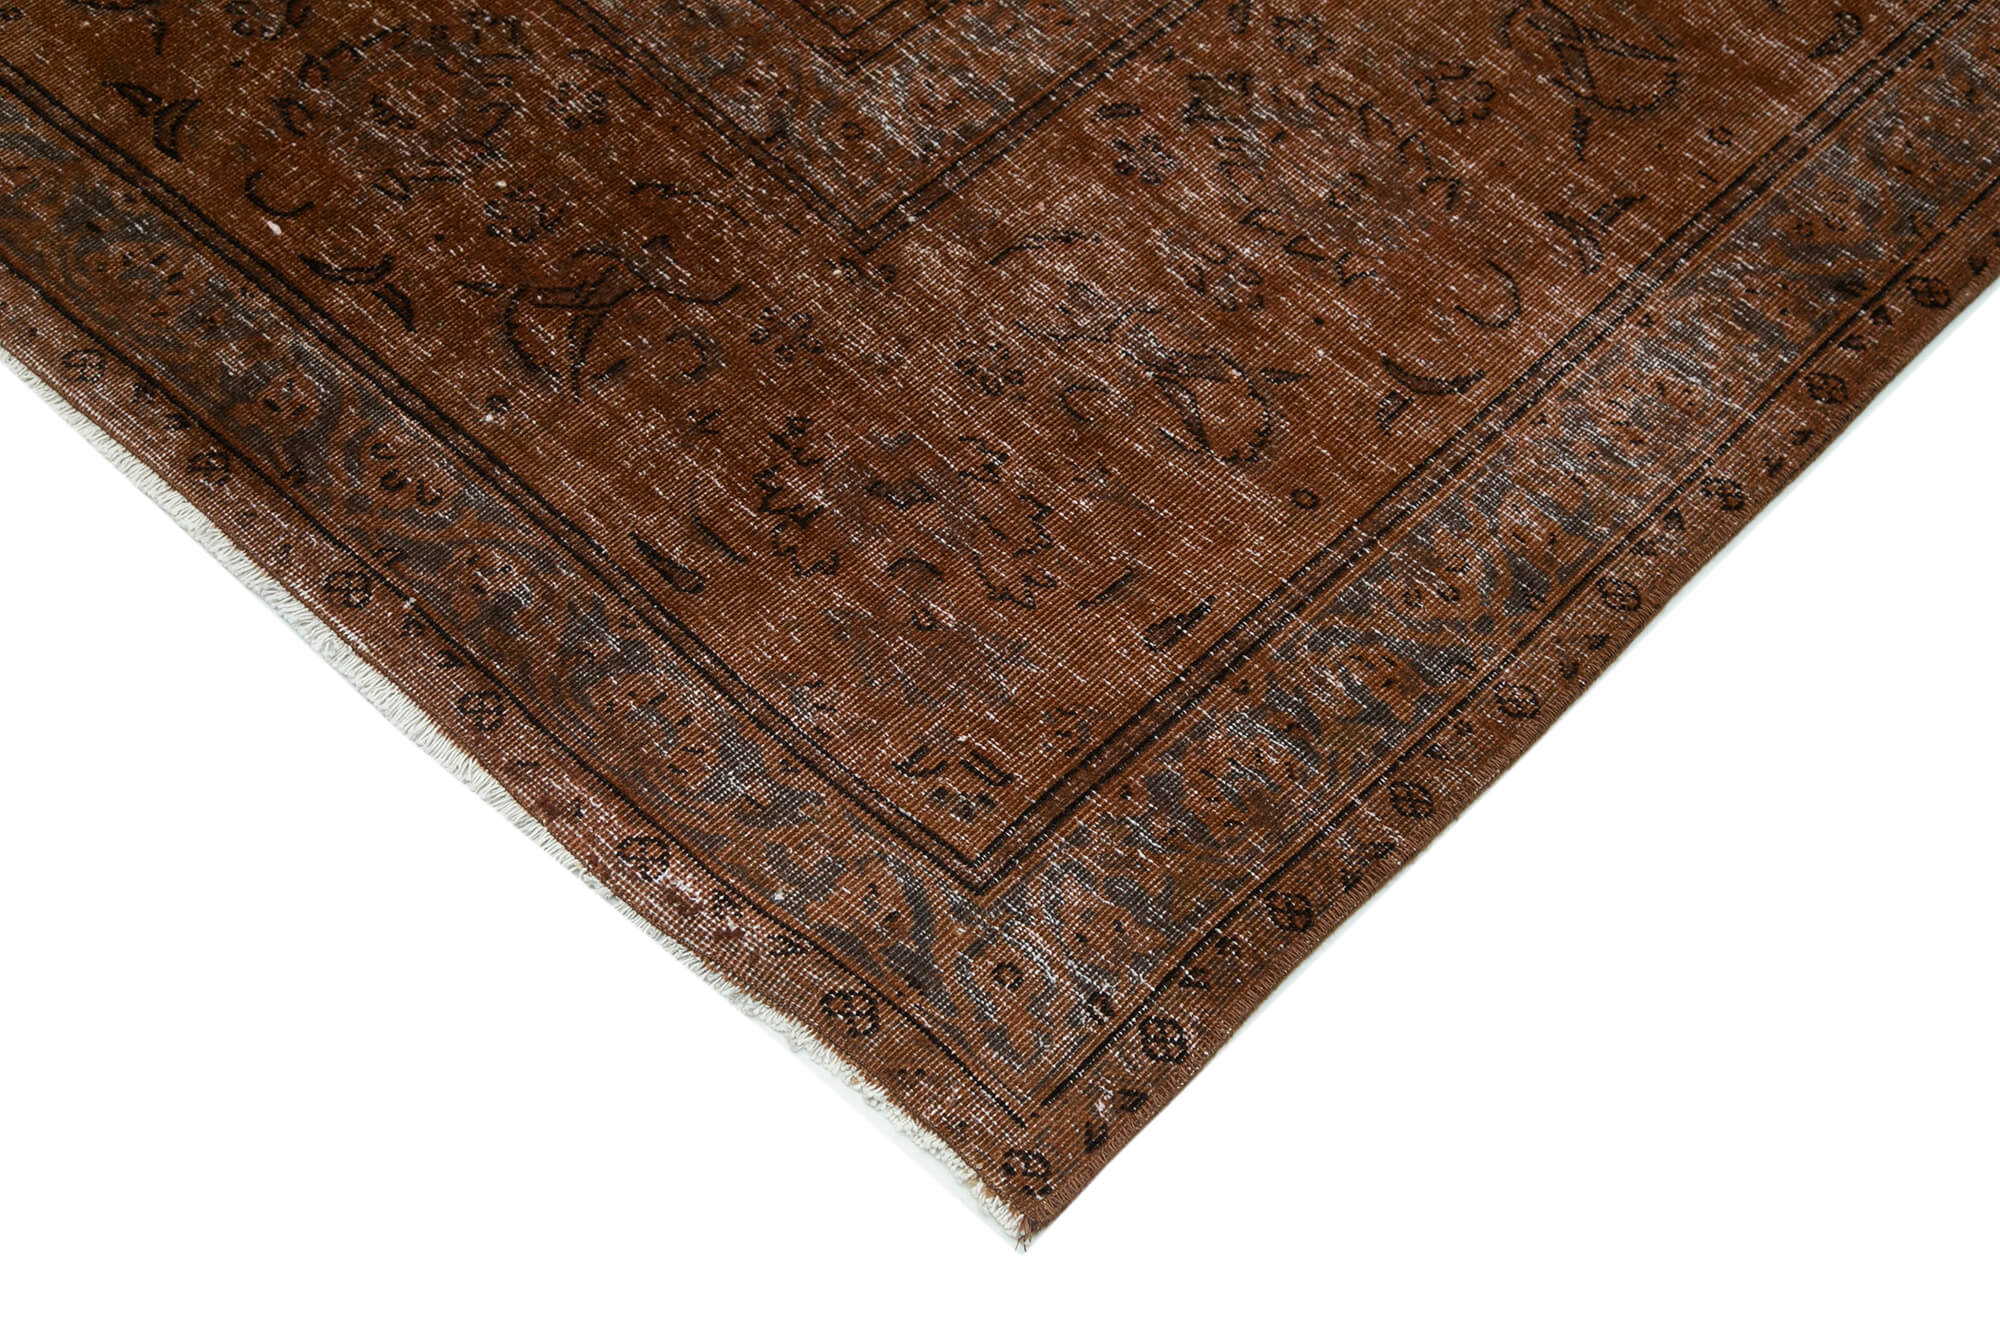 Large Brown Rugs For Living Room